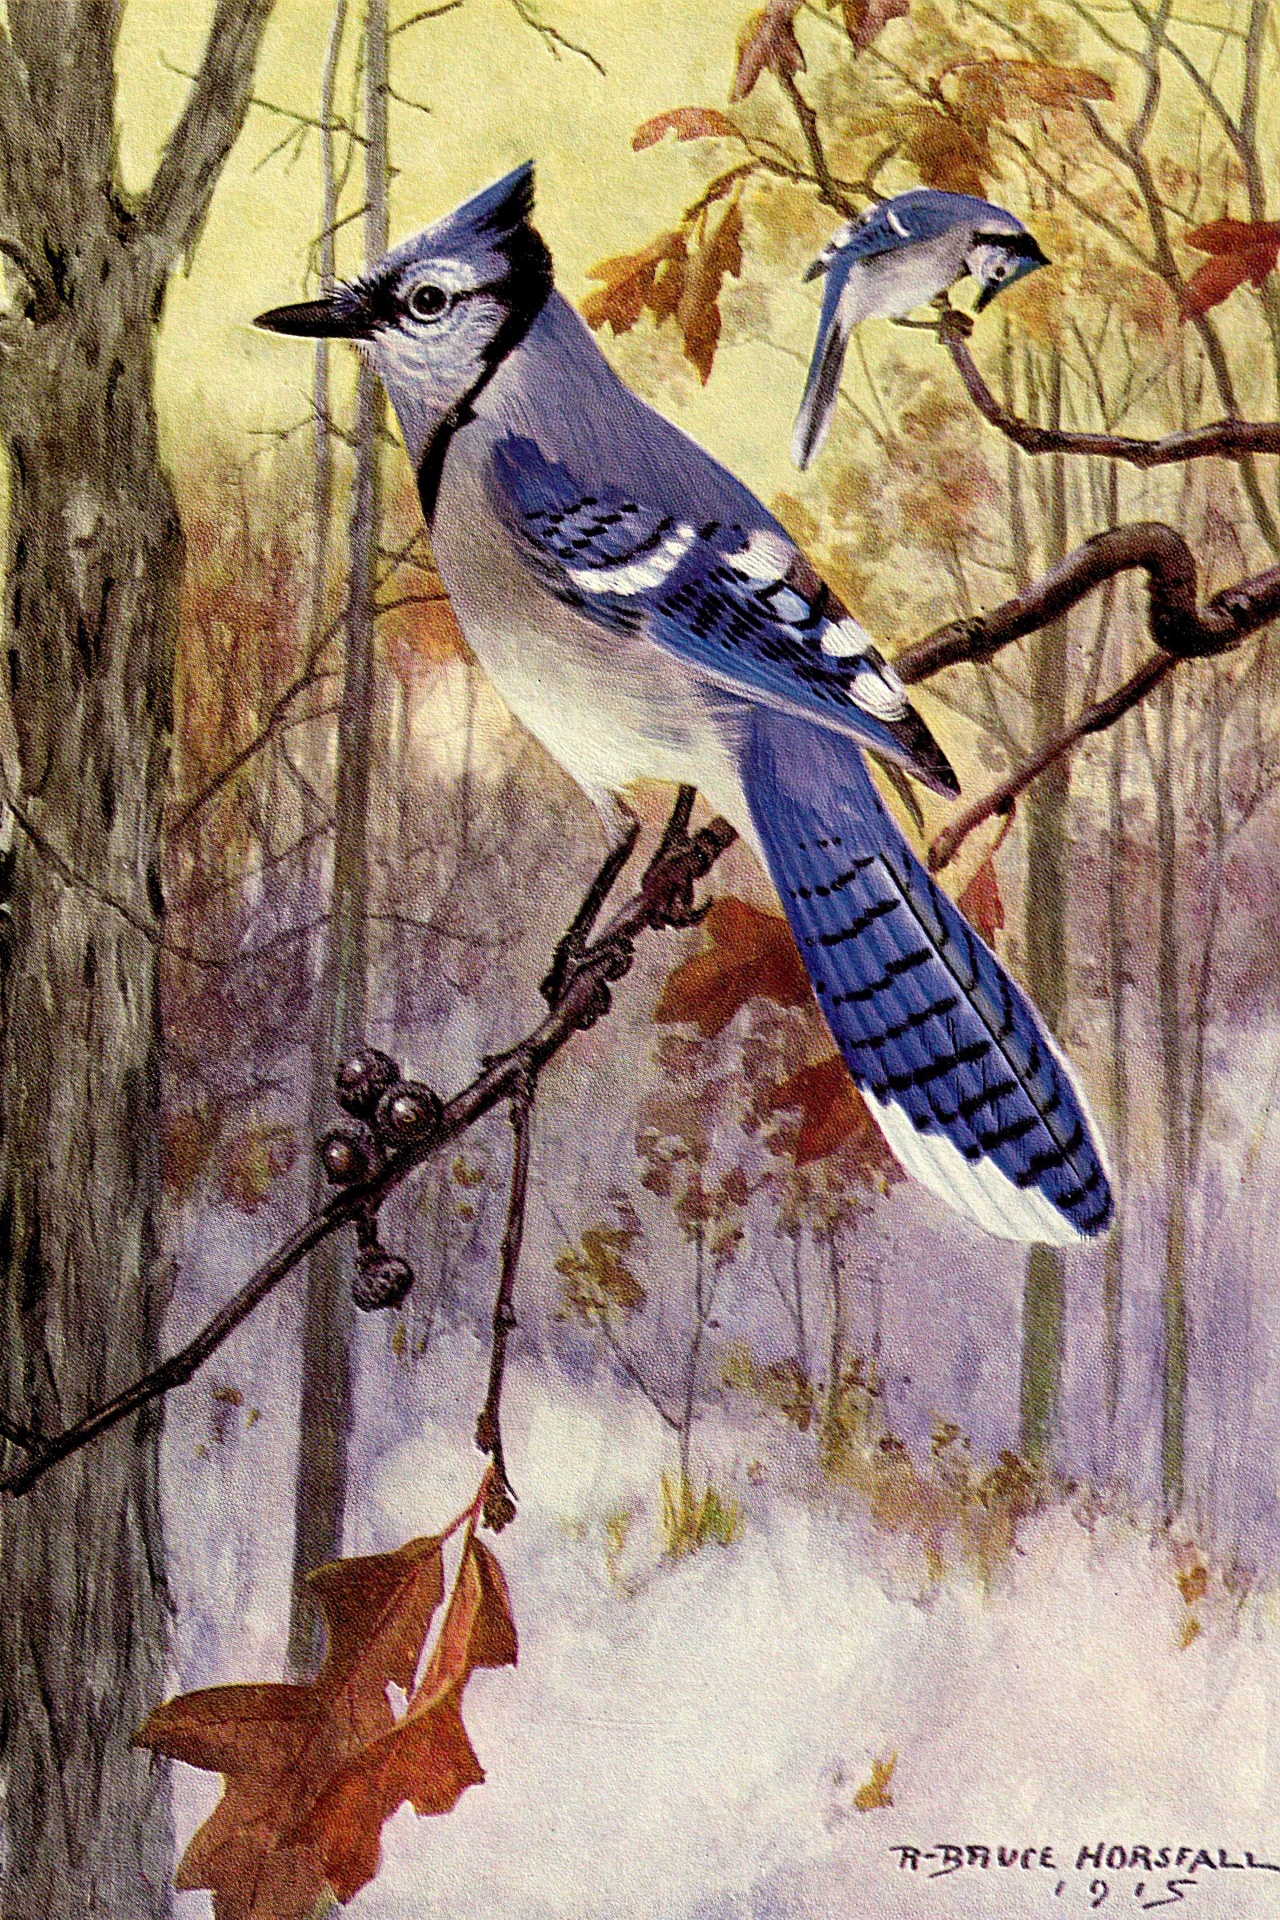 Illustration of Blue Jay in natural surroundings by Robert Bruce Horsfall 1869-1948 from a 1916 vintage bird book. Horsfall was an American wildlife painter and illustrator.